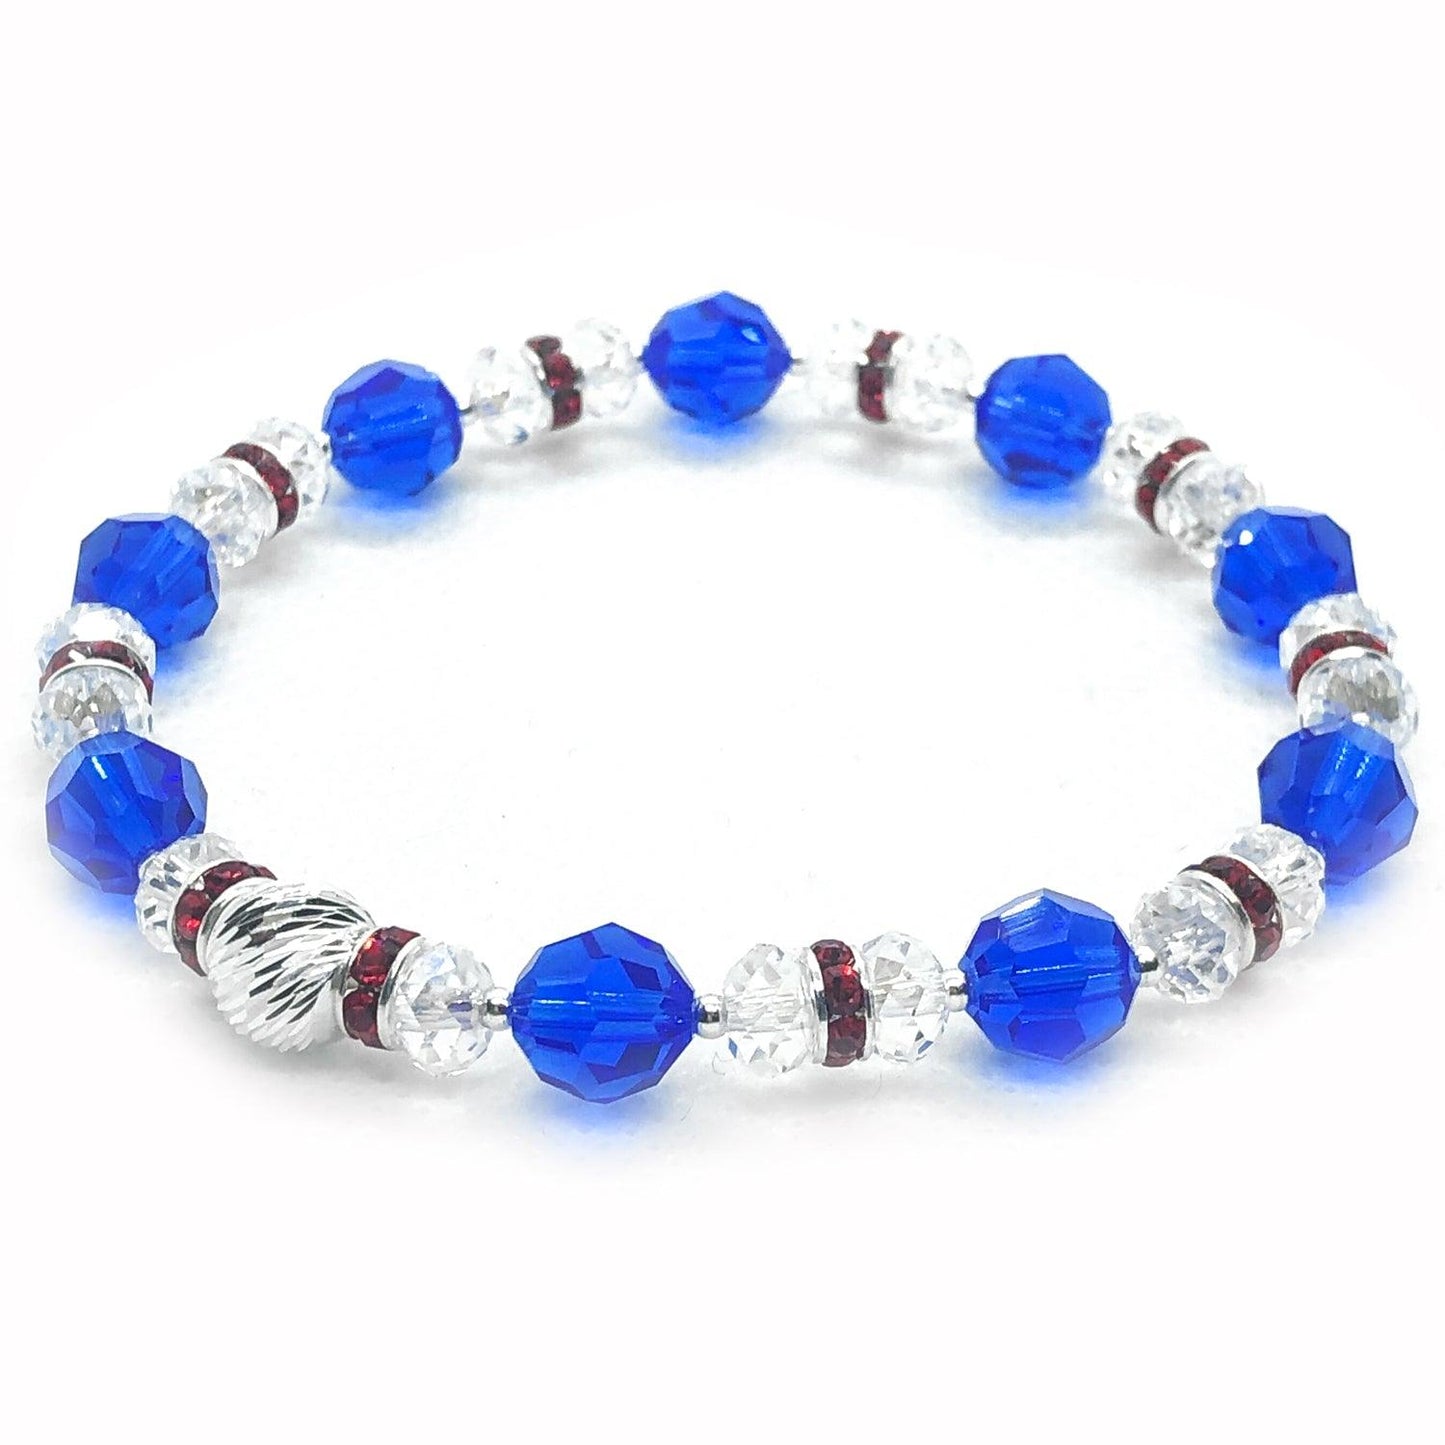 Red, White and Blue Stretch Bracelet Kit - Too Cute Beads